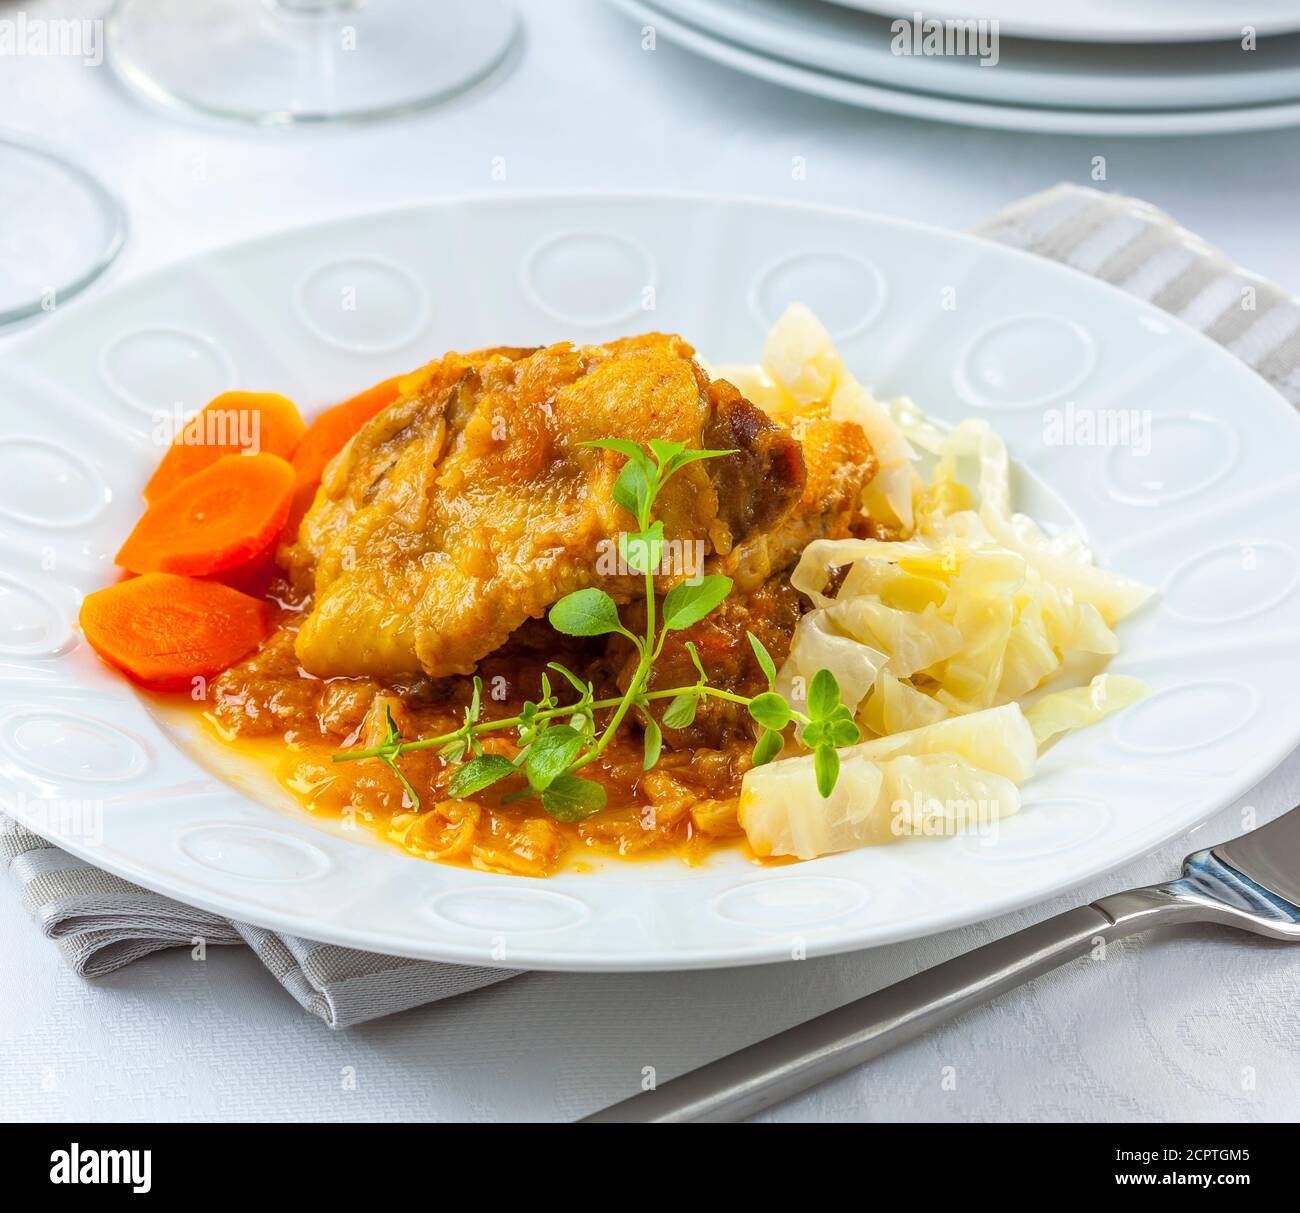 Fried chicken in sauce served with vegetables. Stock Photo